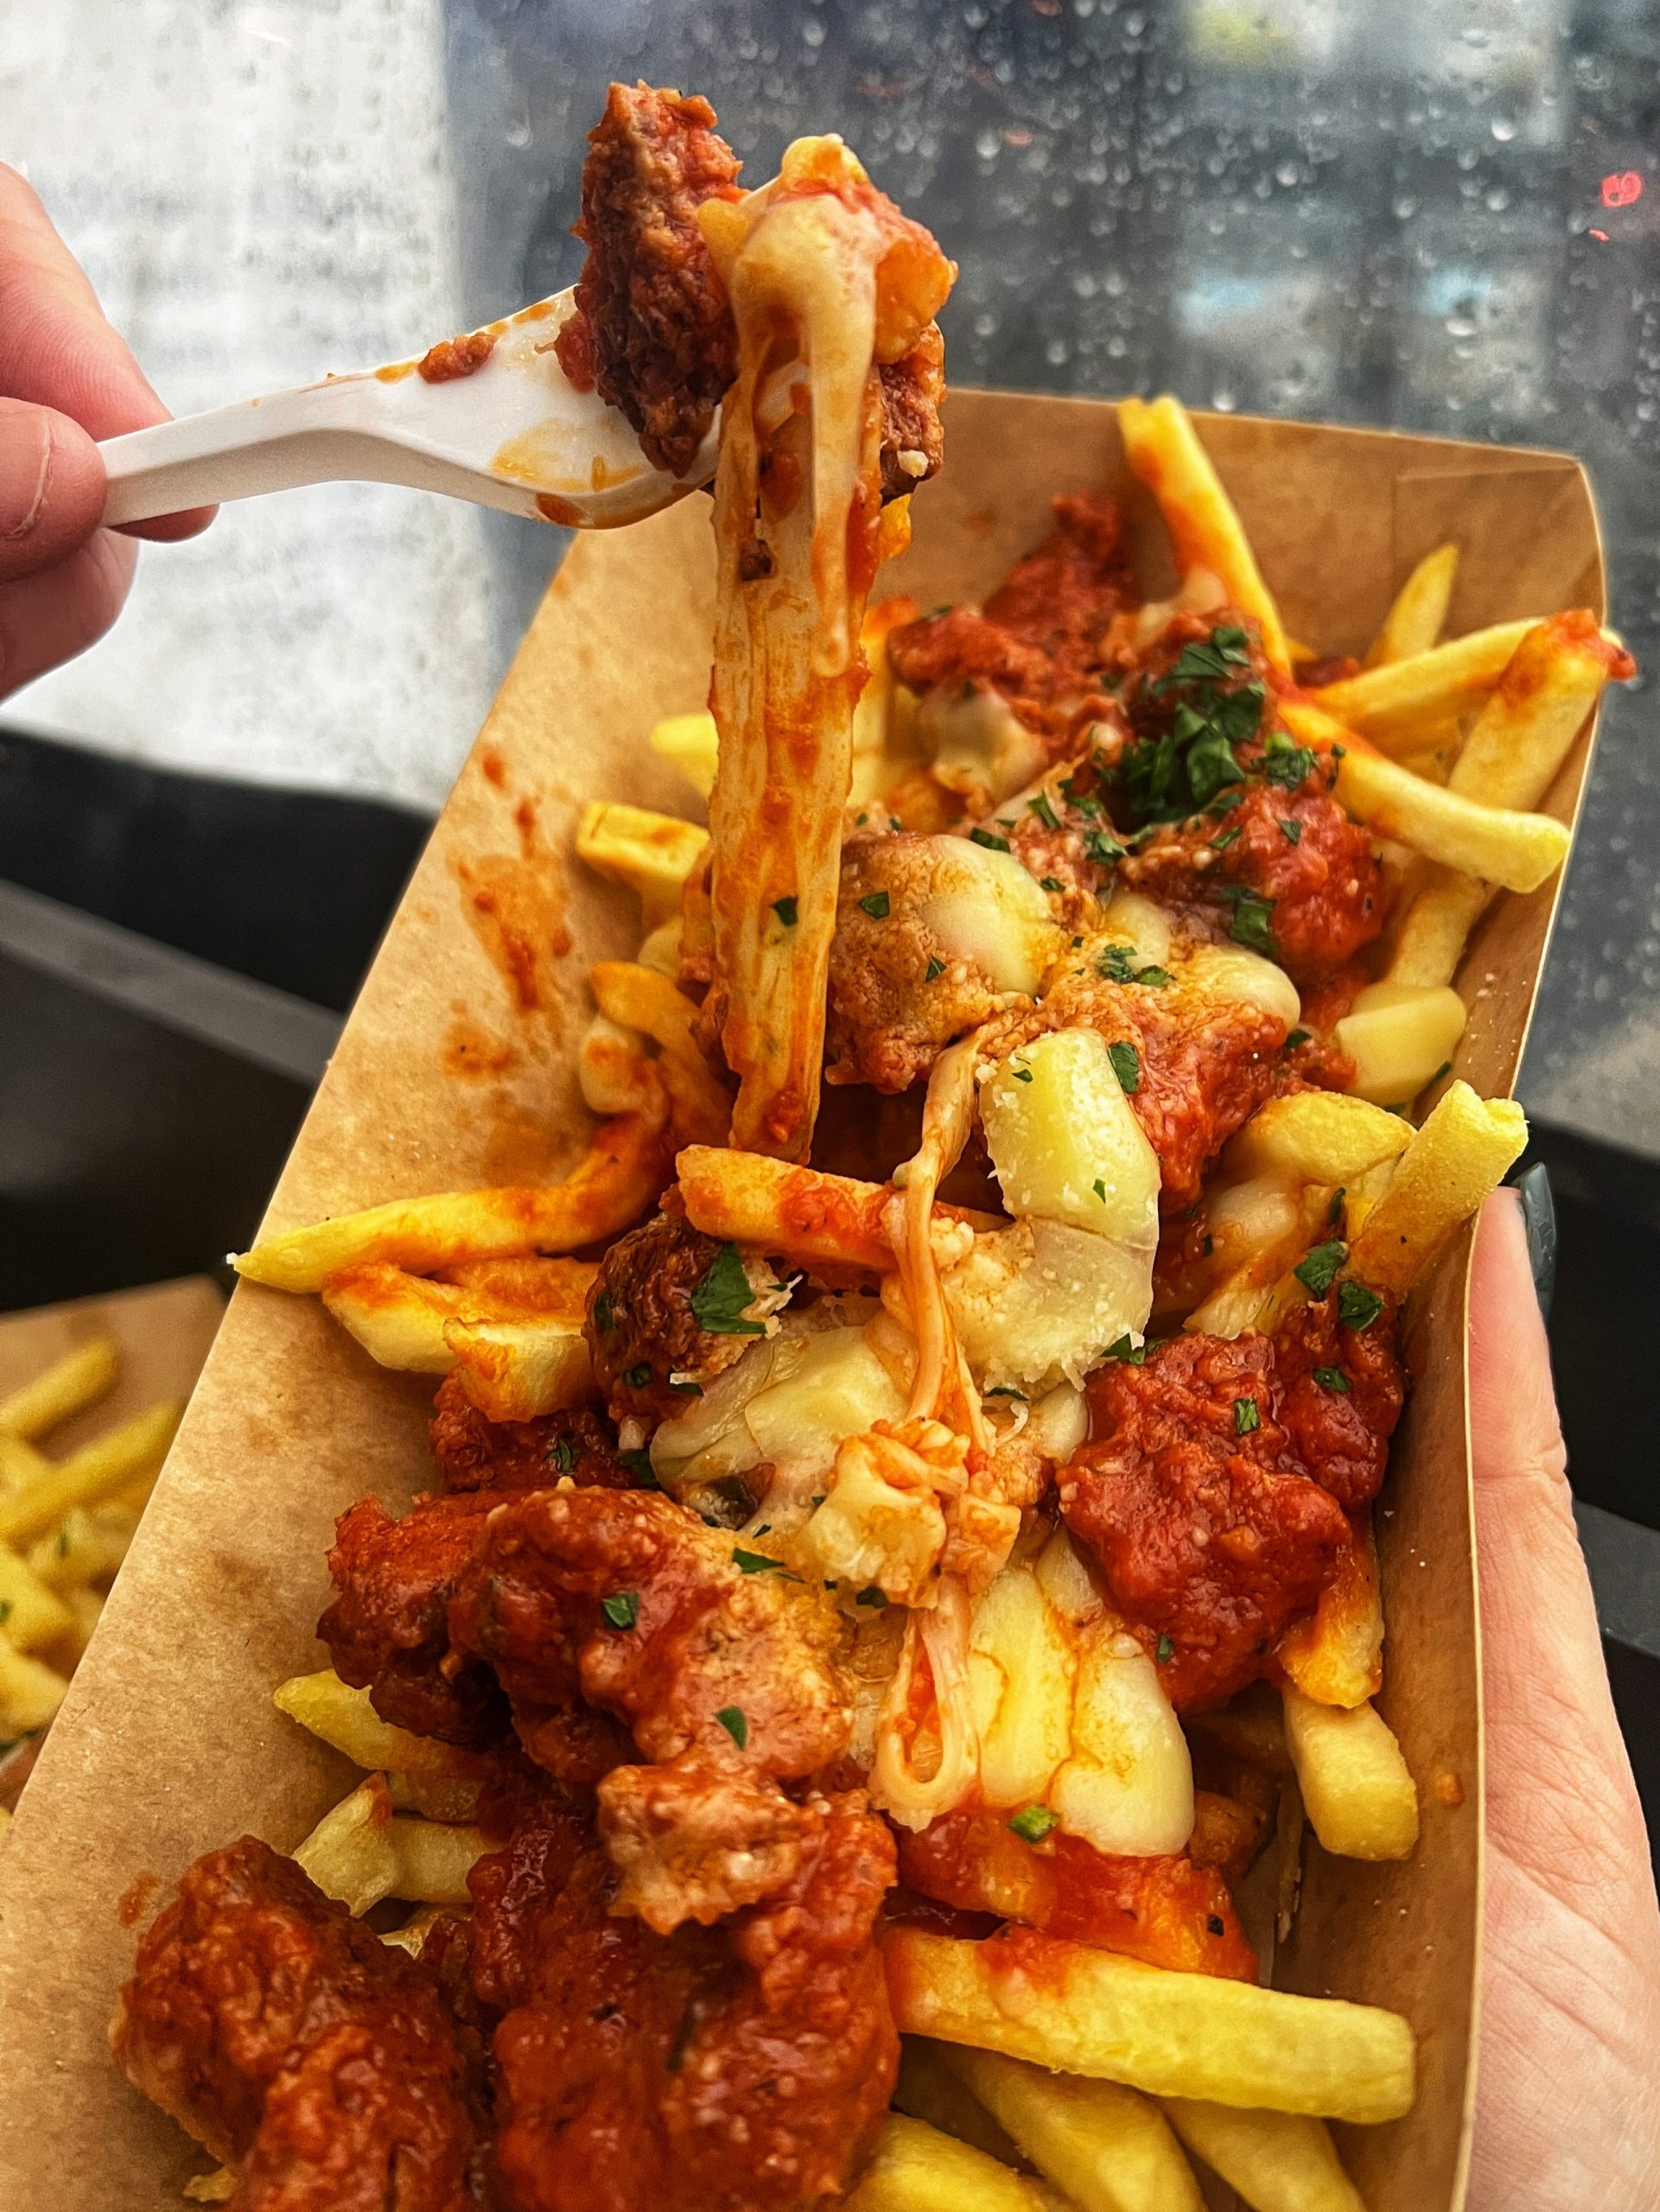 meatballs and fries.